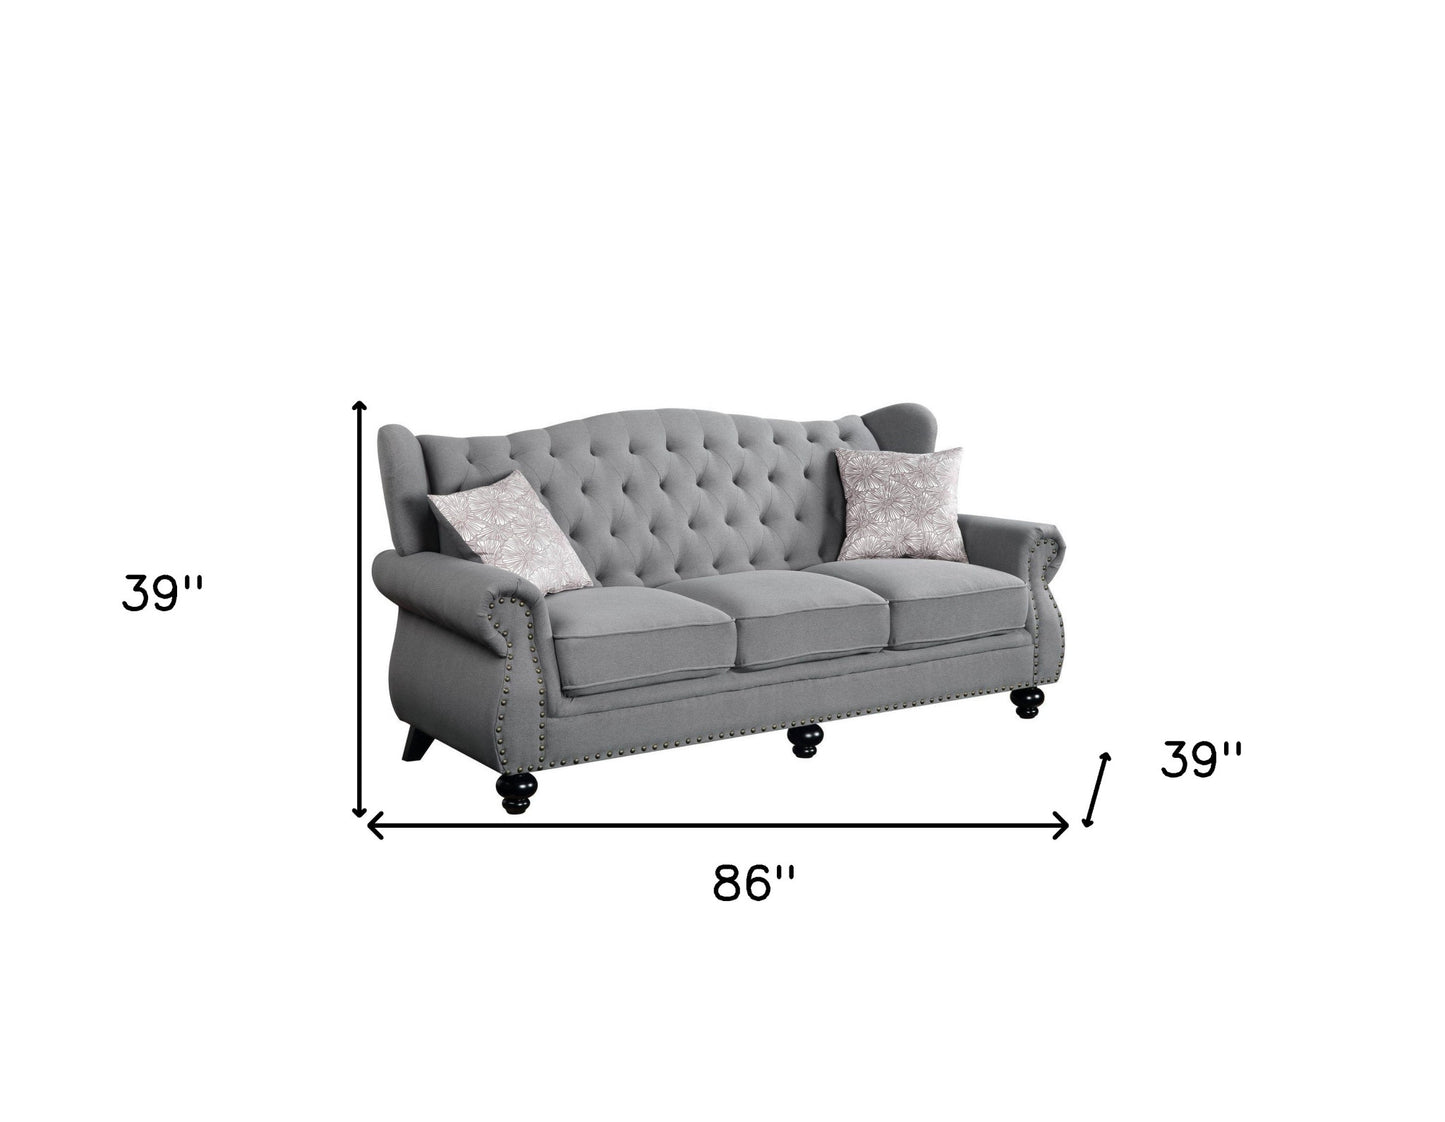 86" Gray Sofa And Toss Pillows With Black Legs